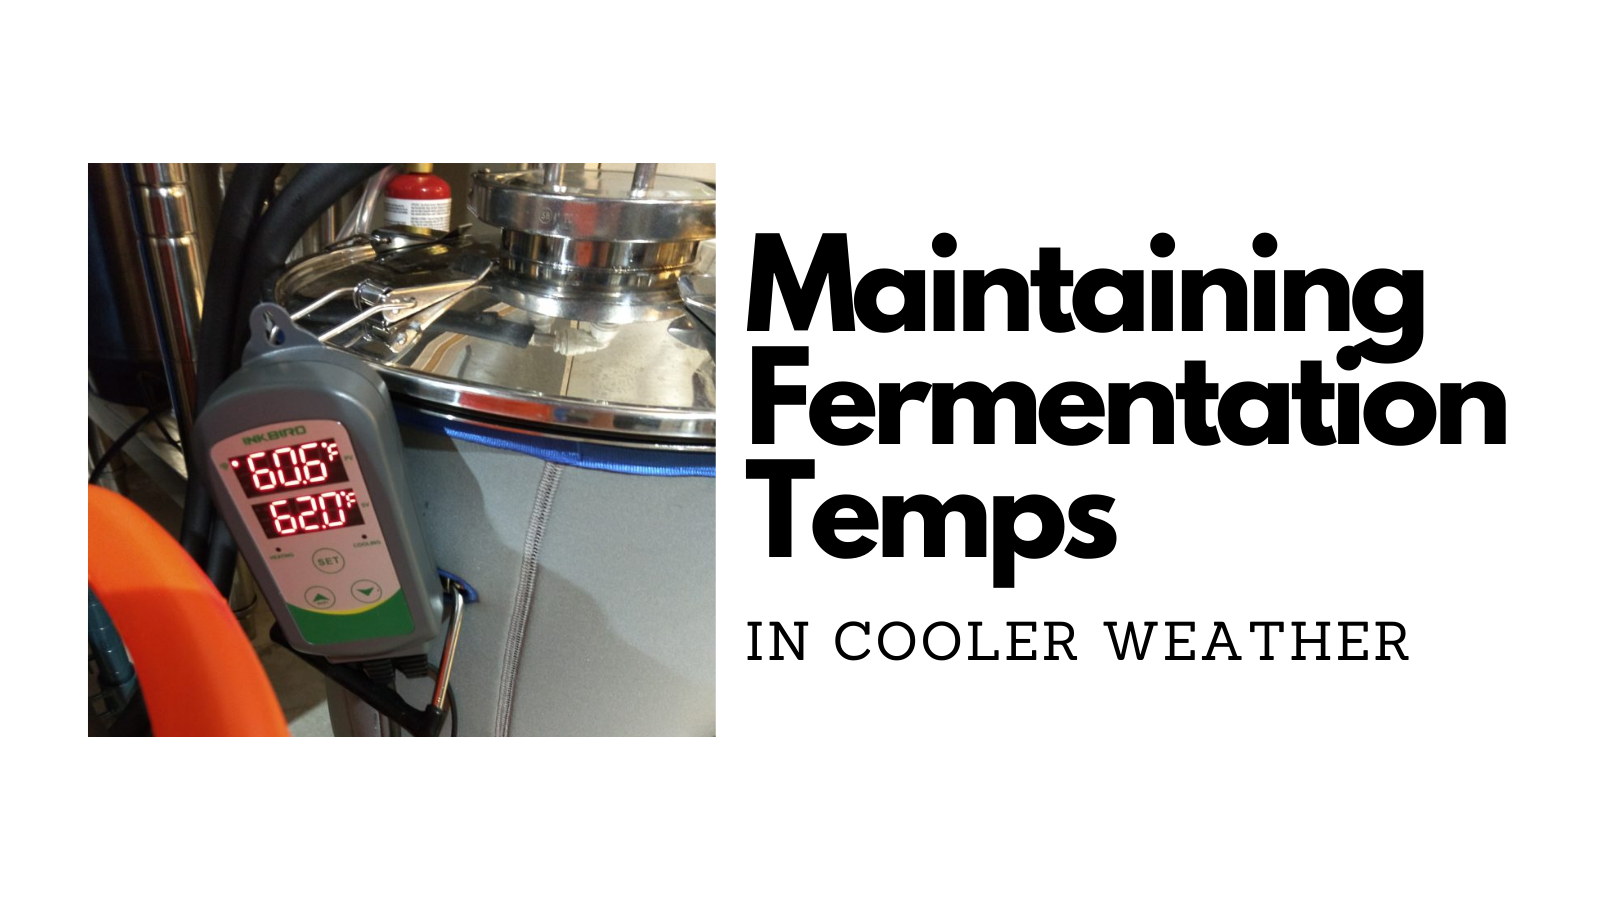 cold weather homebrewing